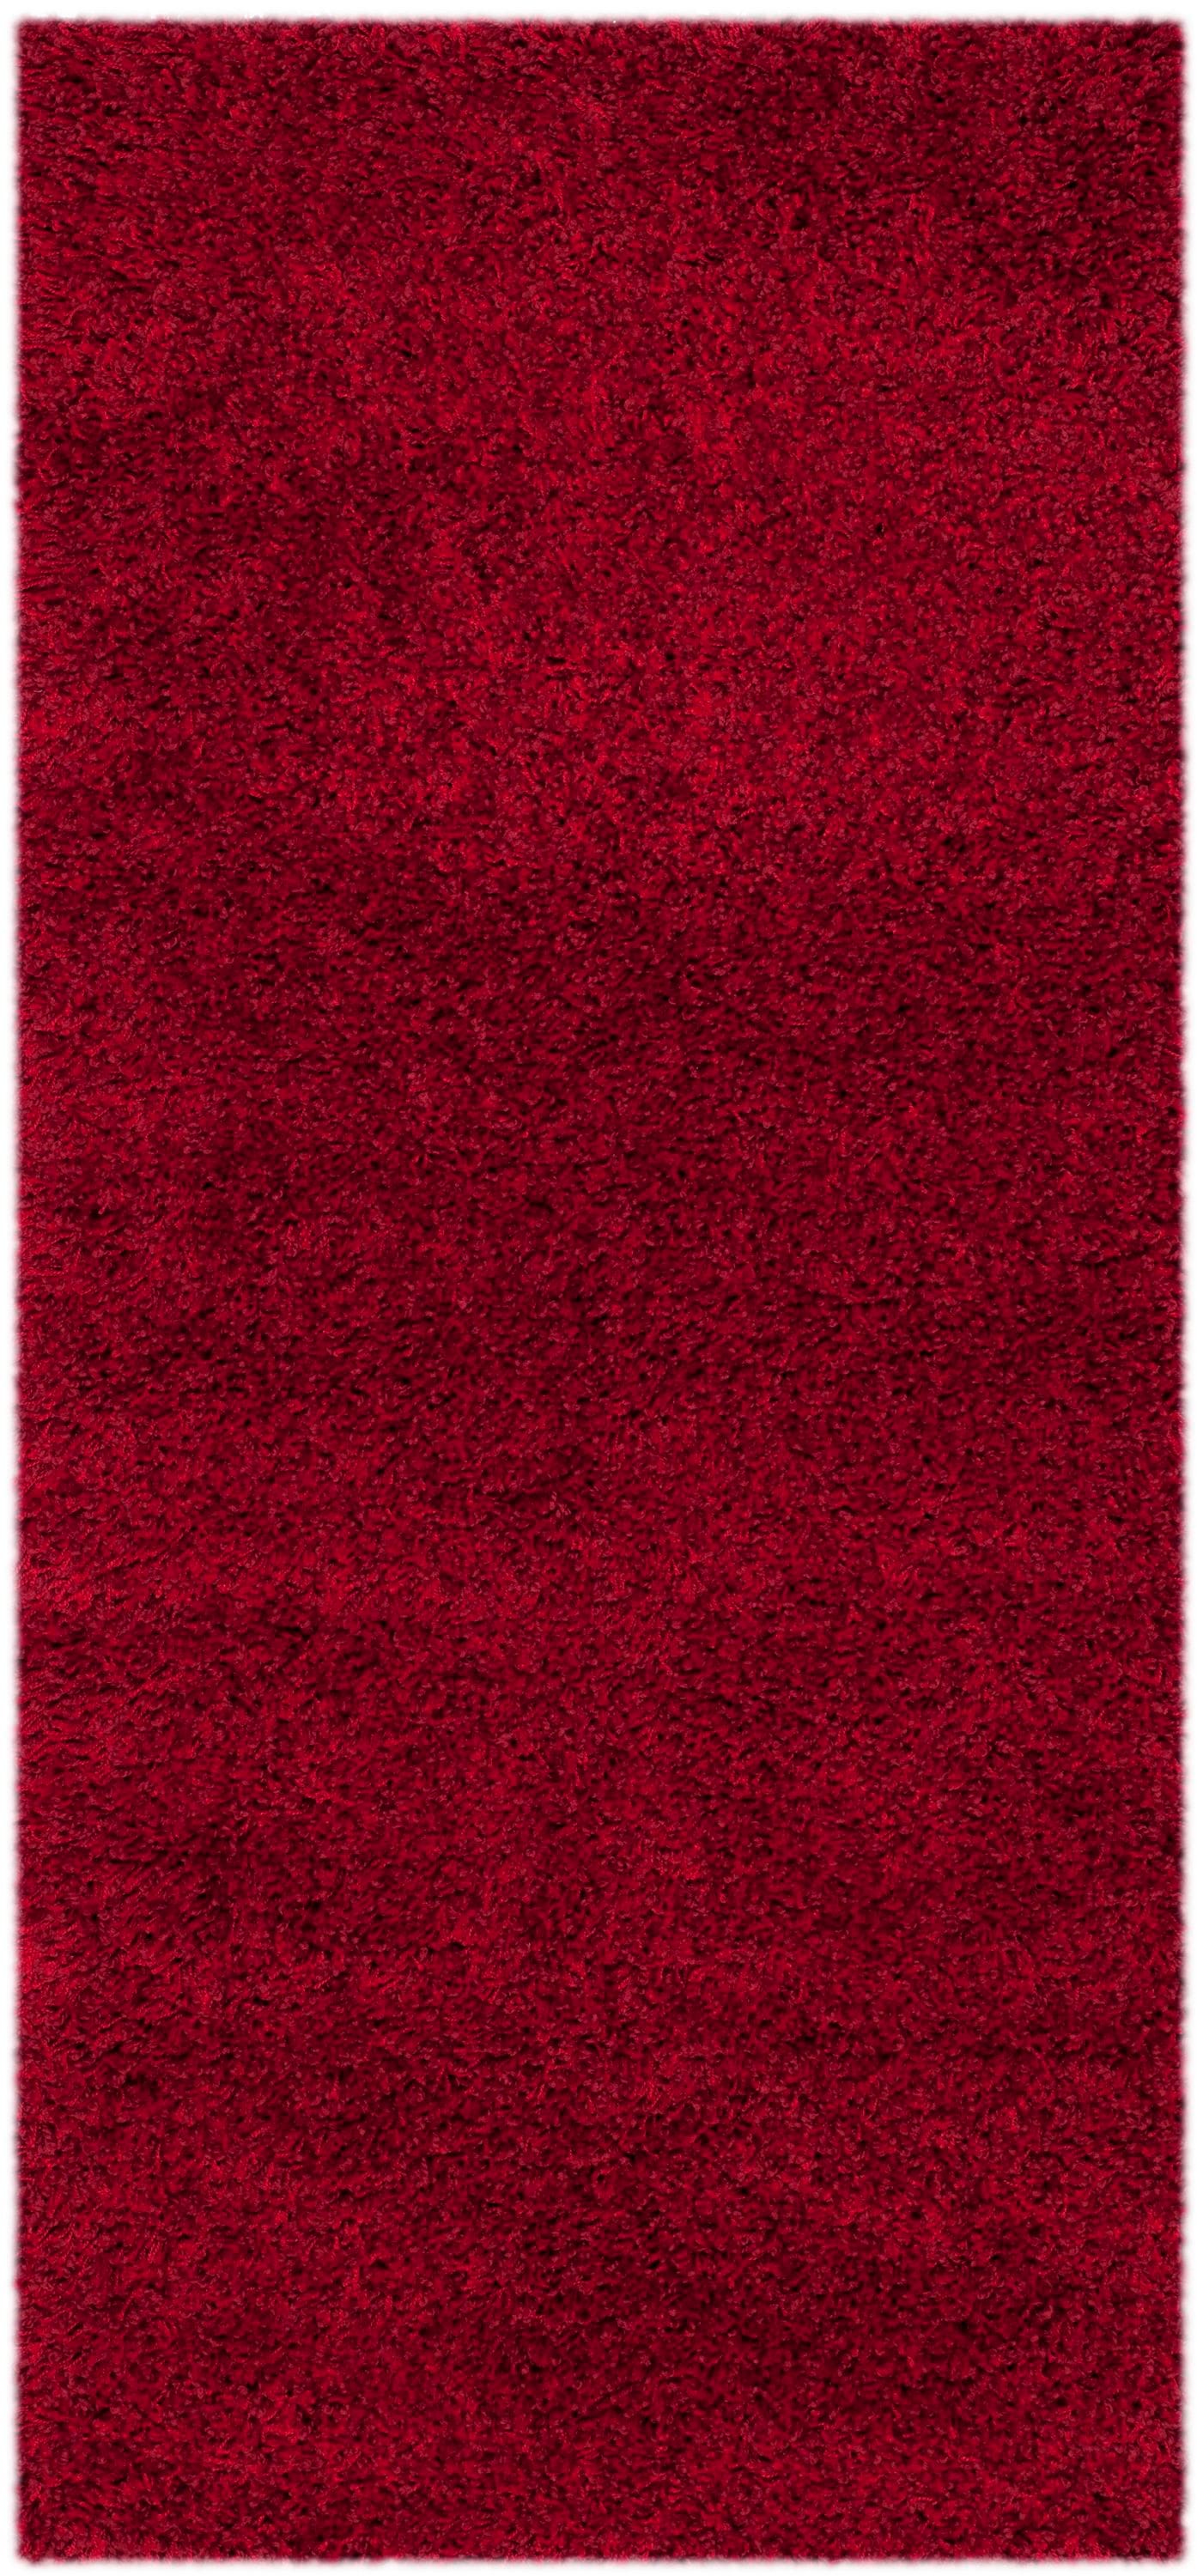 Red Indoor Solid Runner Rug, Black And Red Rugs Australia